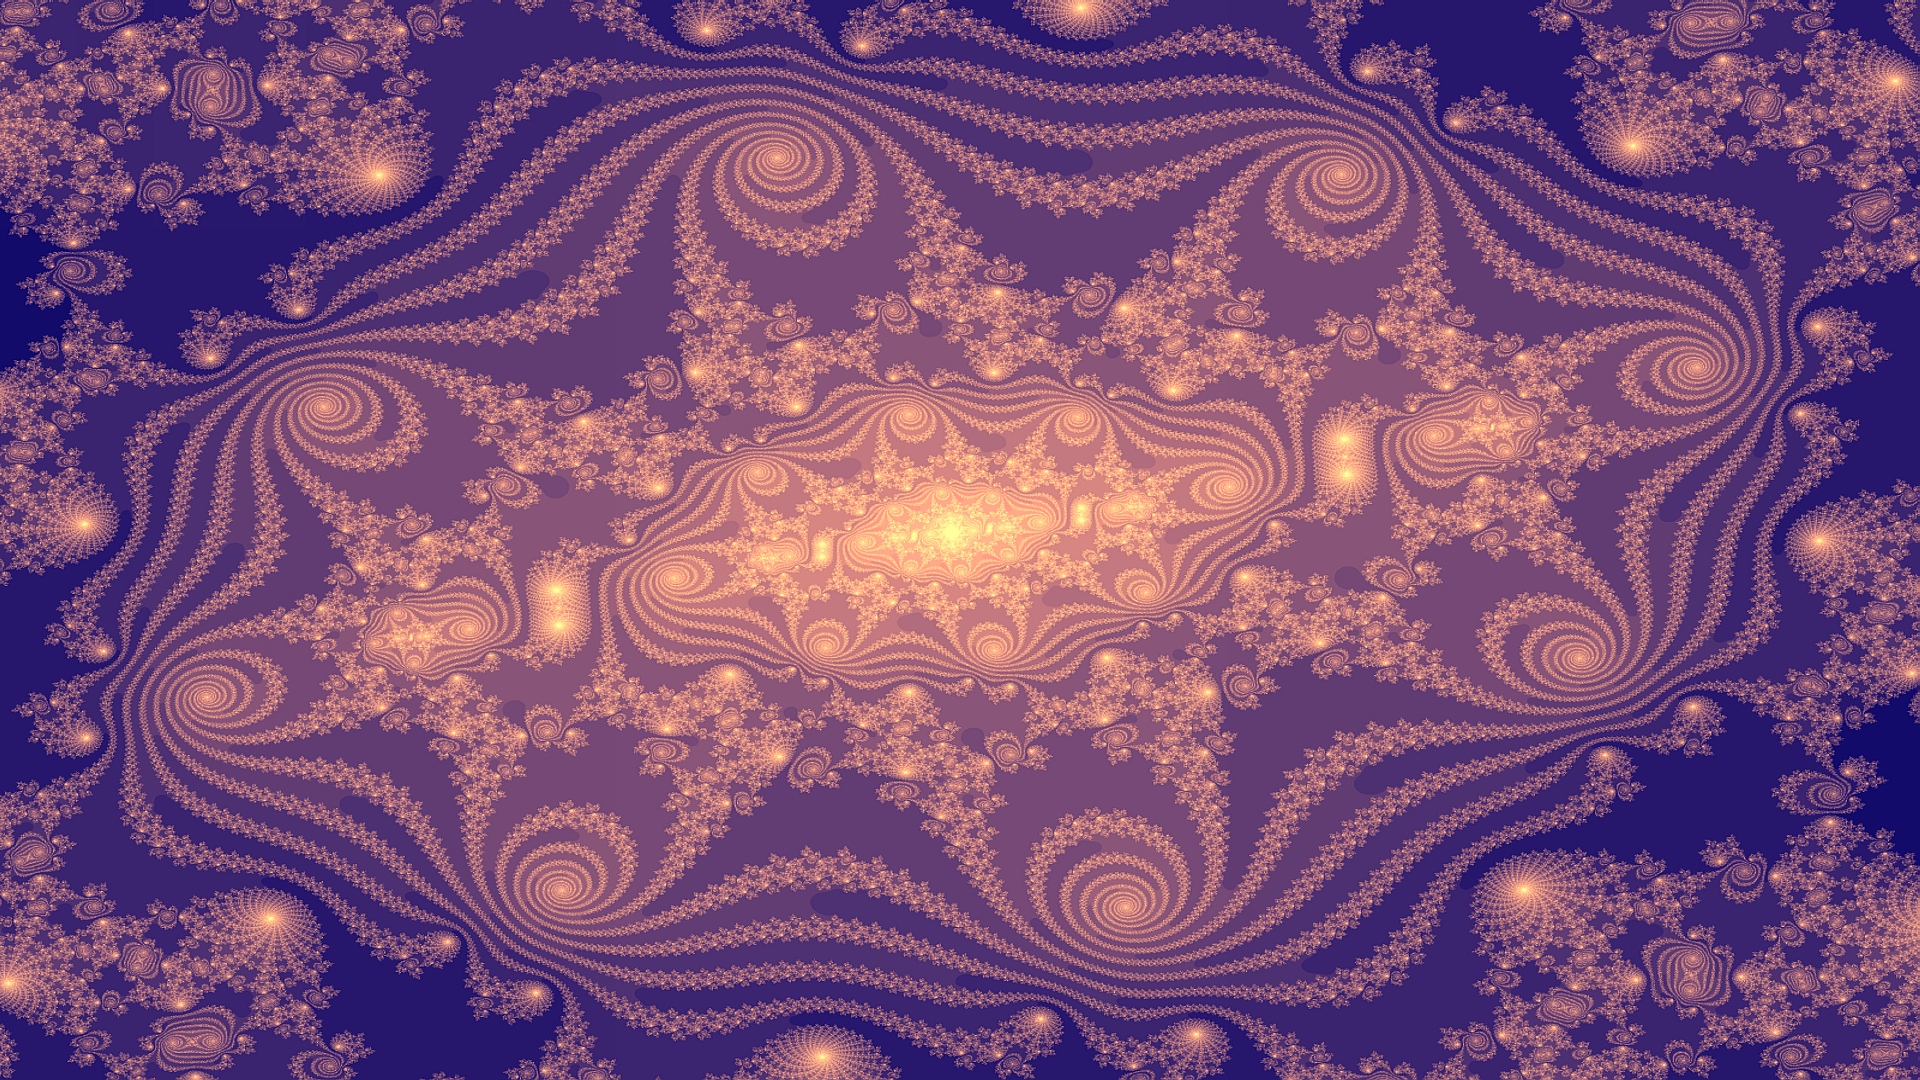 Fractal Wallpaper Purple And Pink